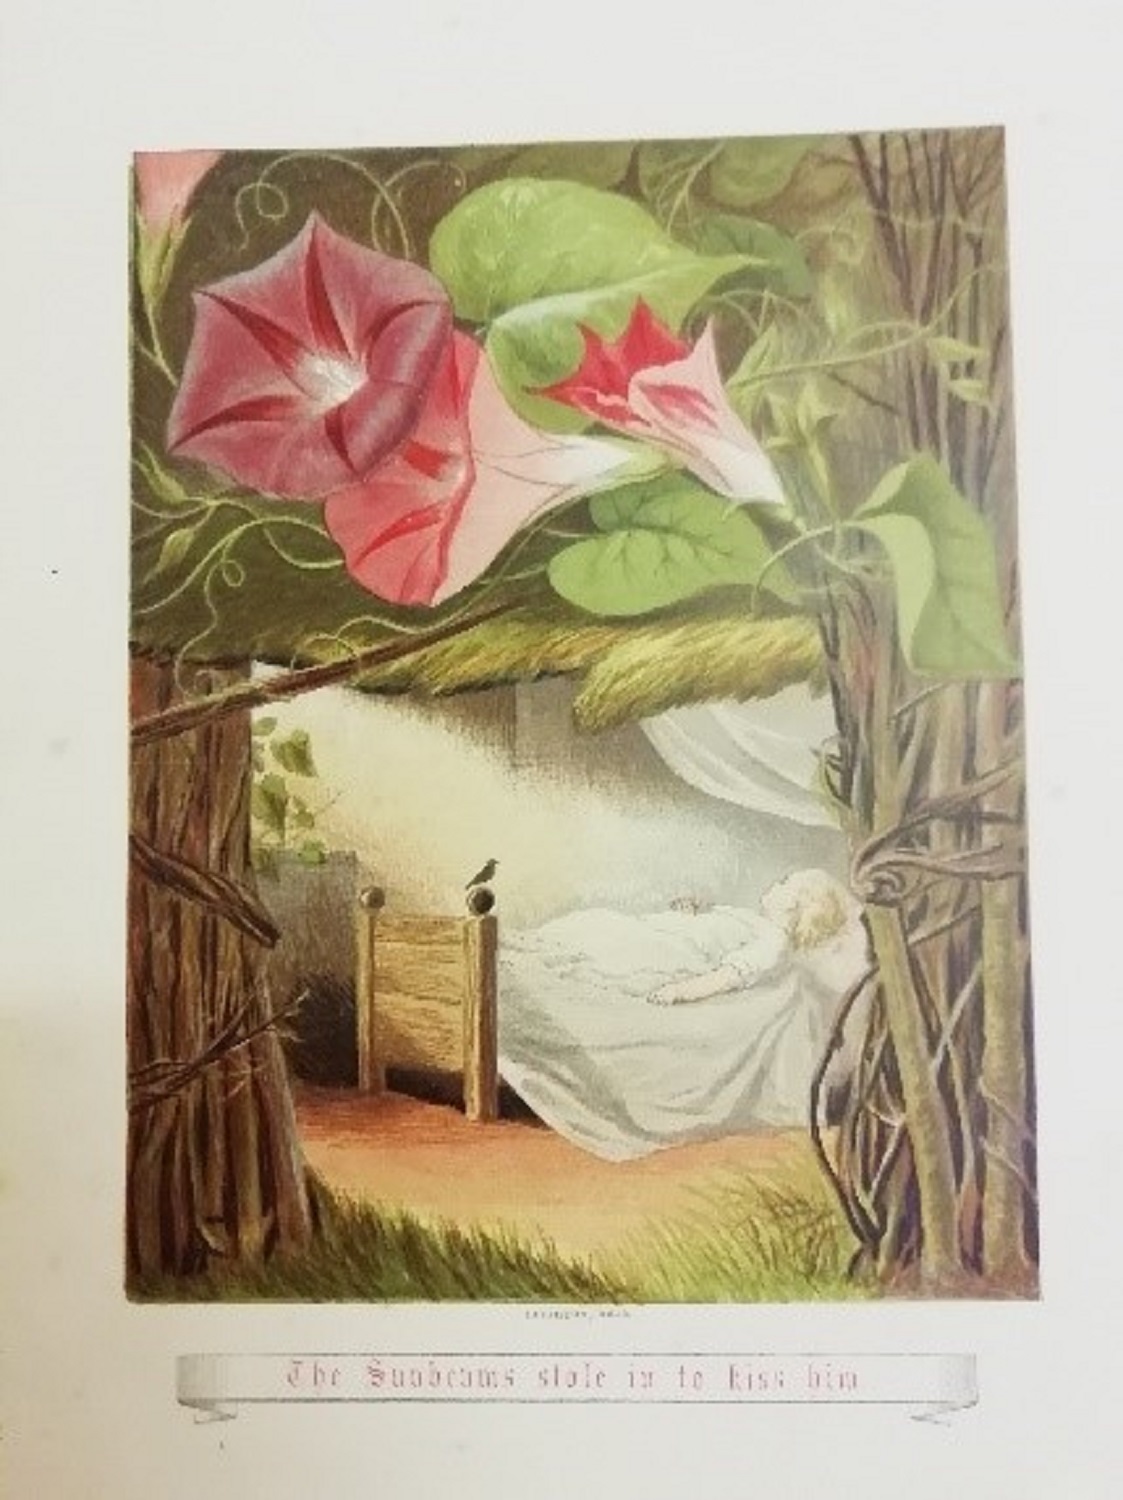 Image of flowers and bed from 'The Story Without End', Museum of Childhood